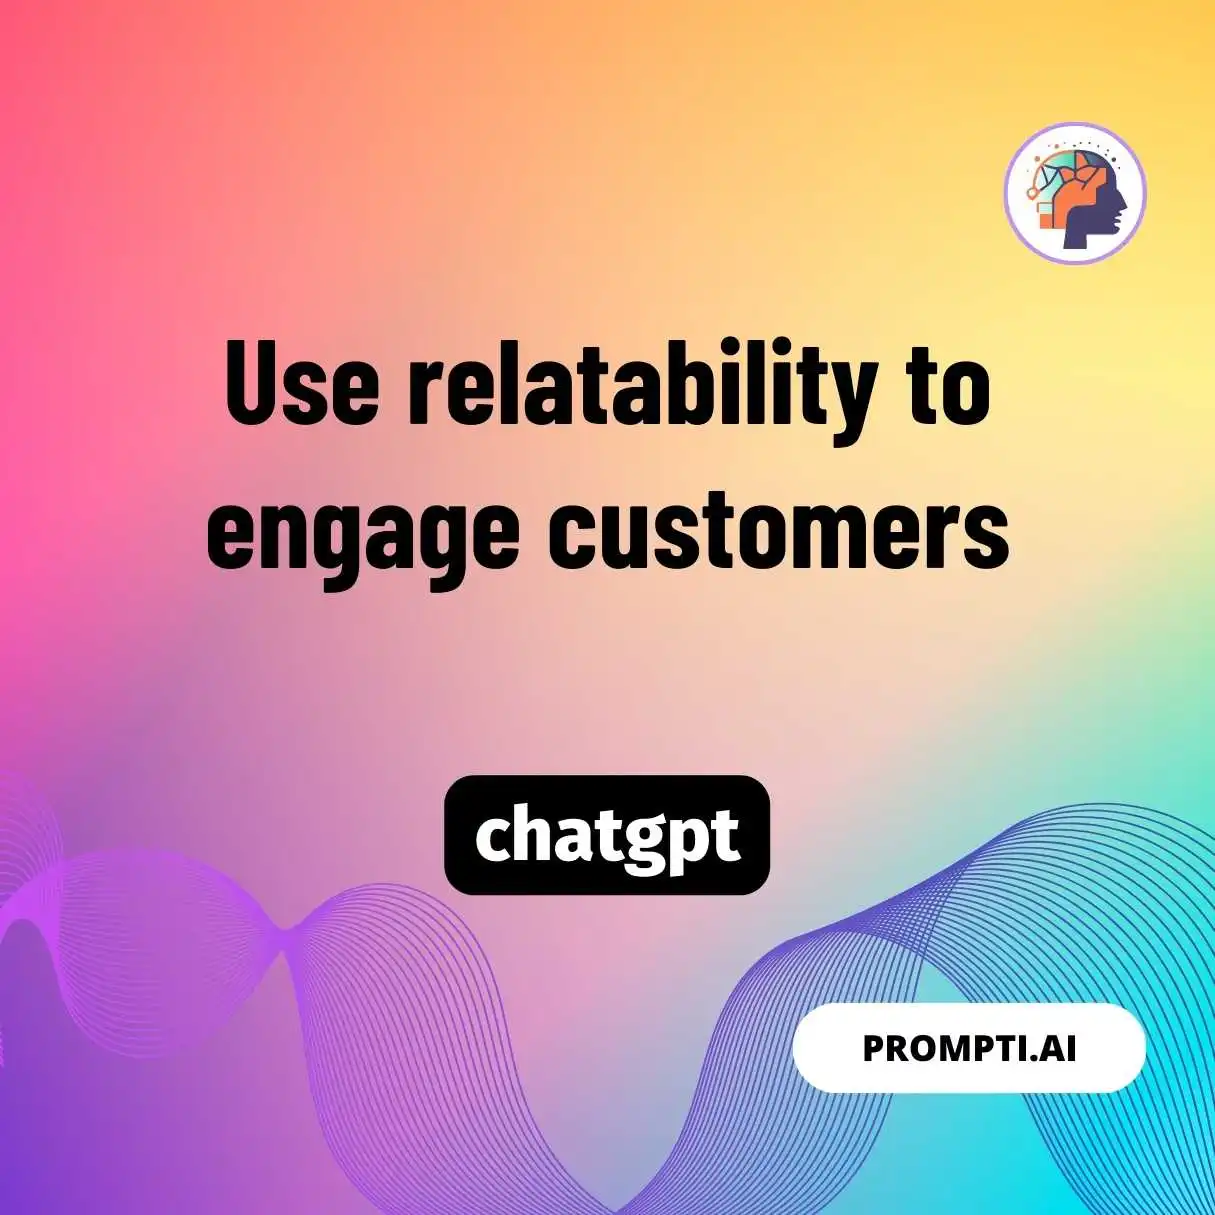 Use relatability to engage customers